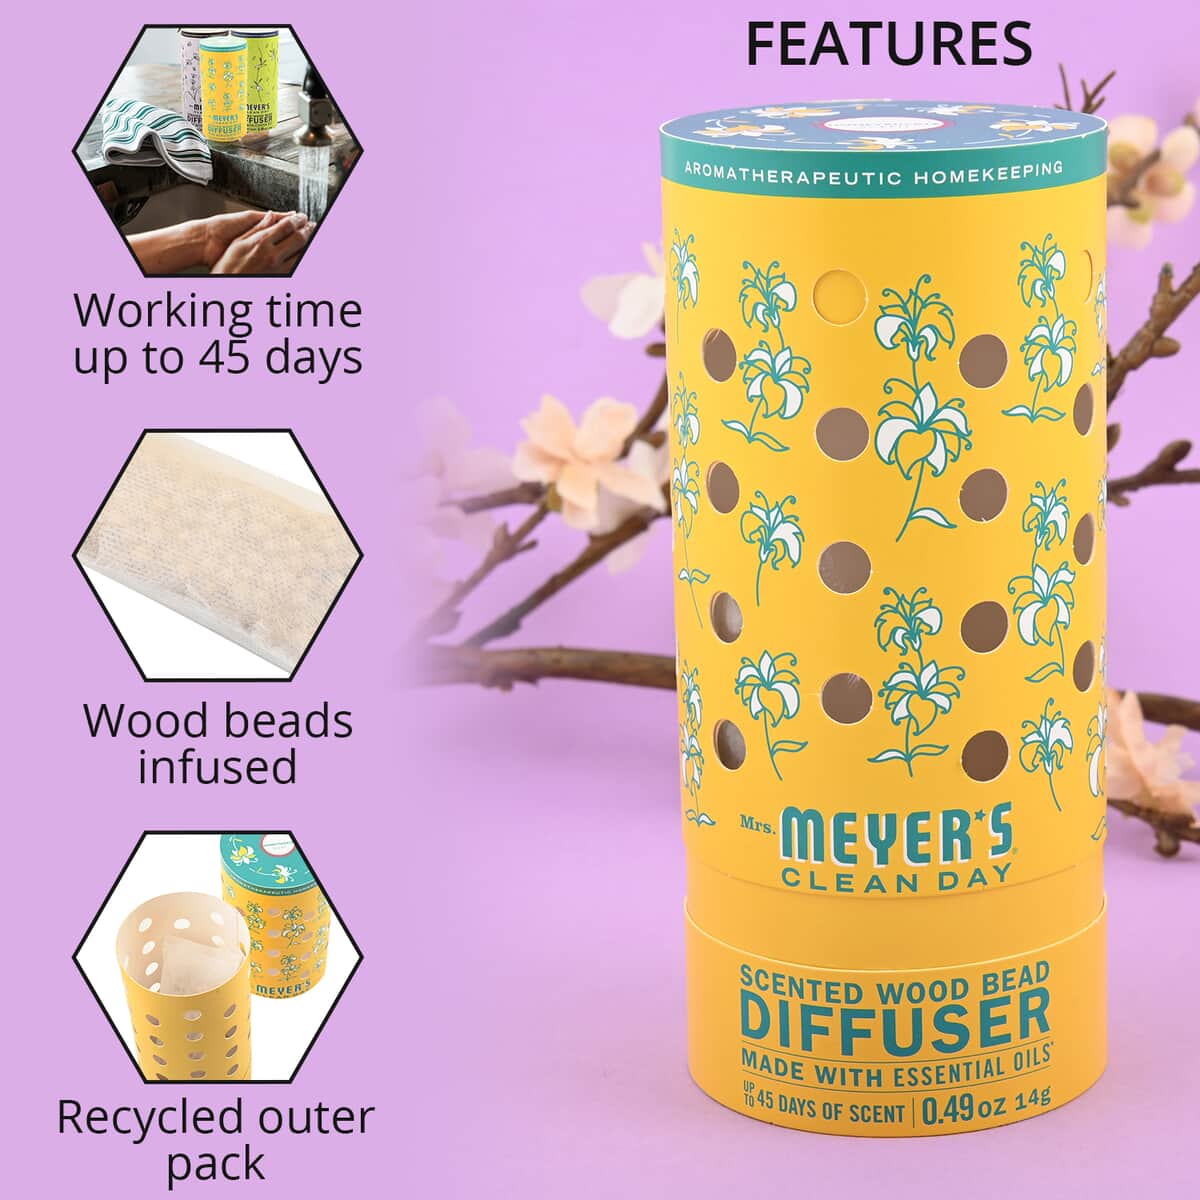 Mrs. Meyer's Clean Day Scented Wood Bead Diffuser - Honeysuckle 0.49 oz image number 1